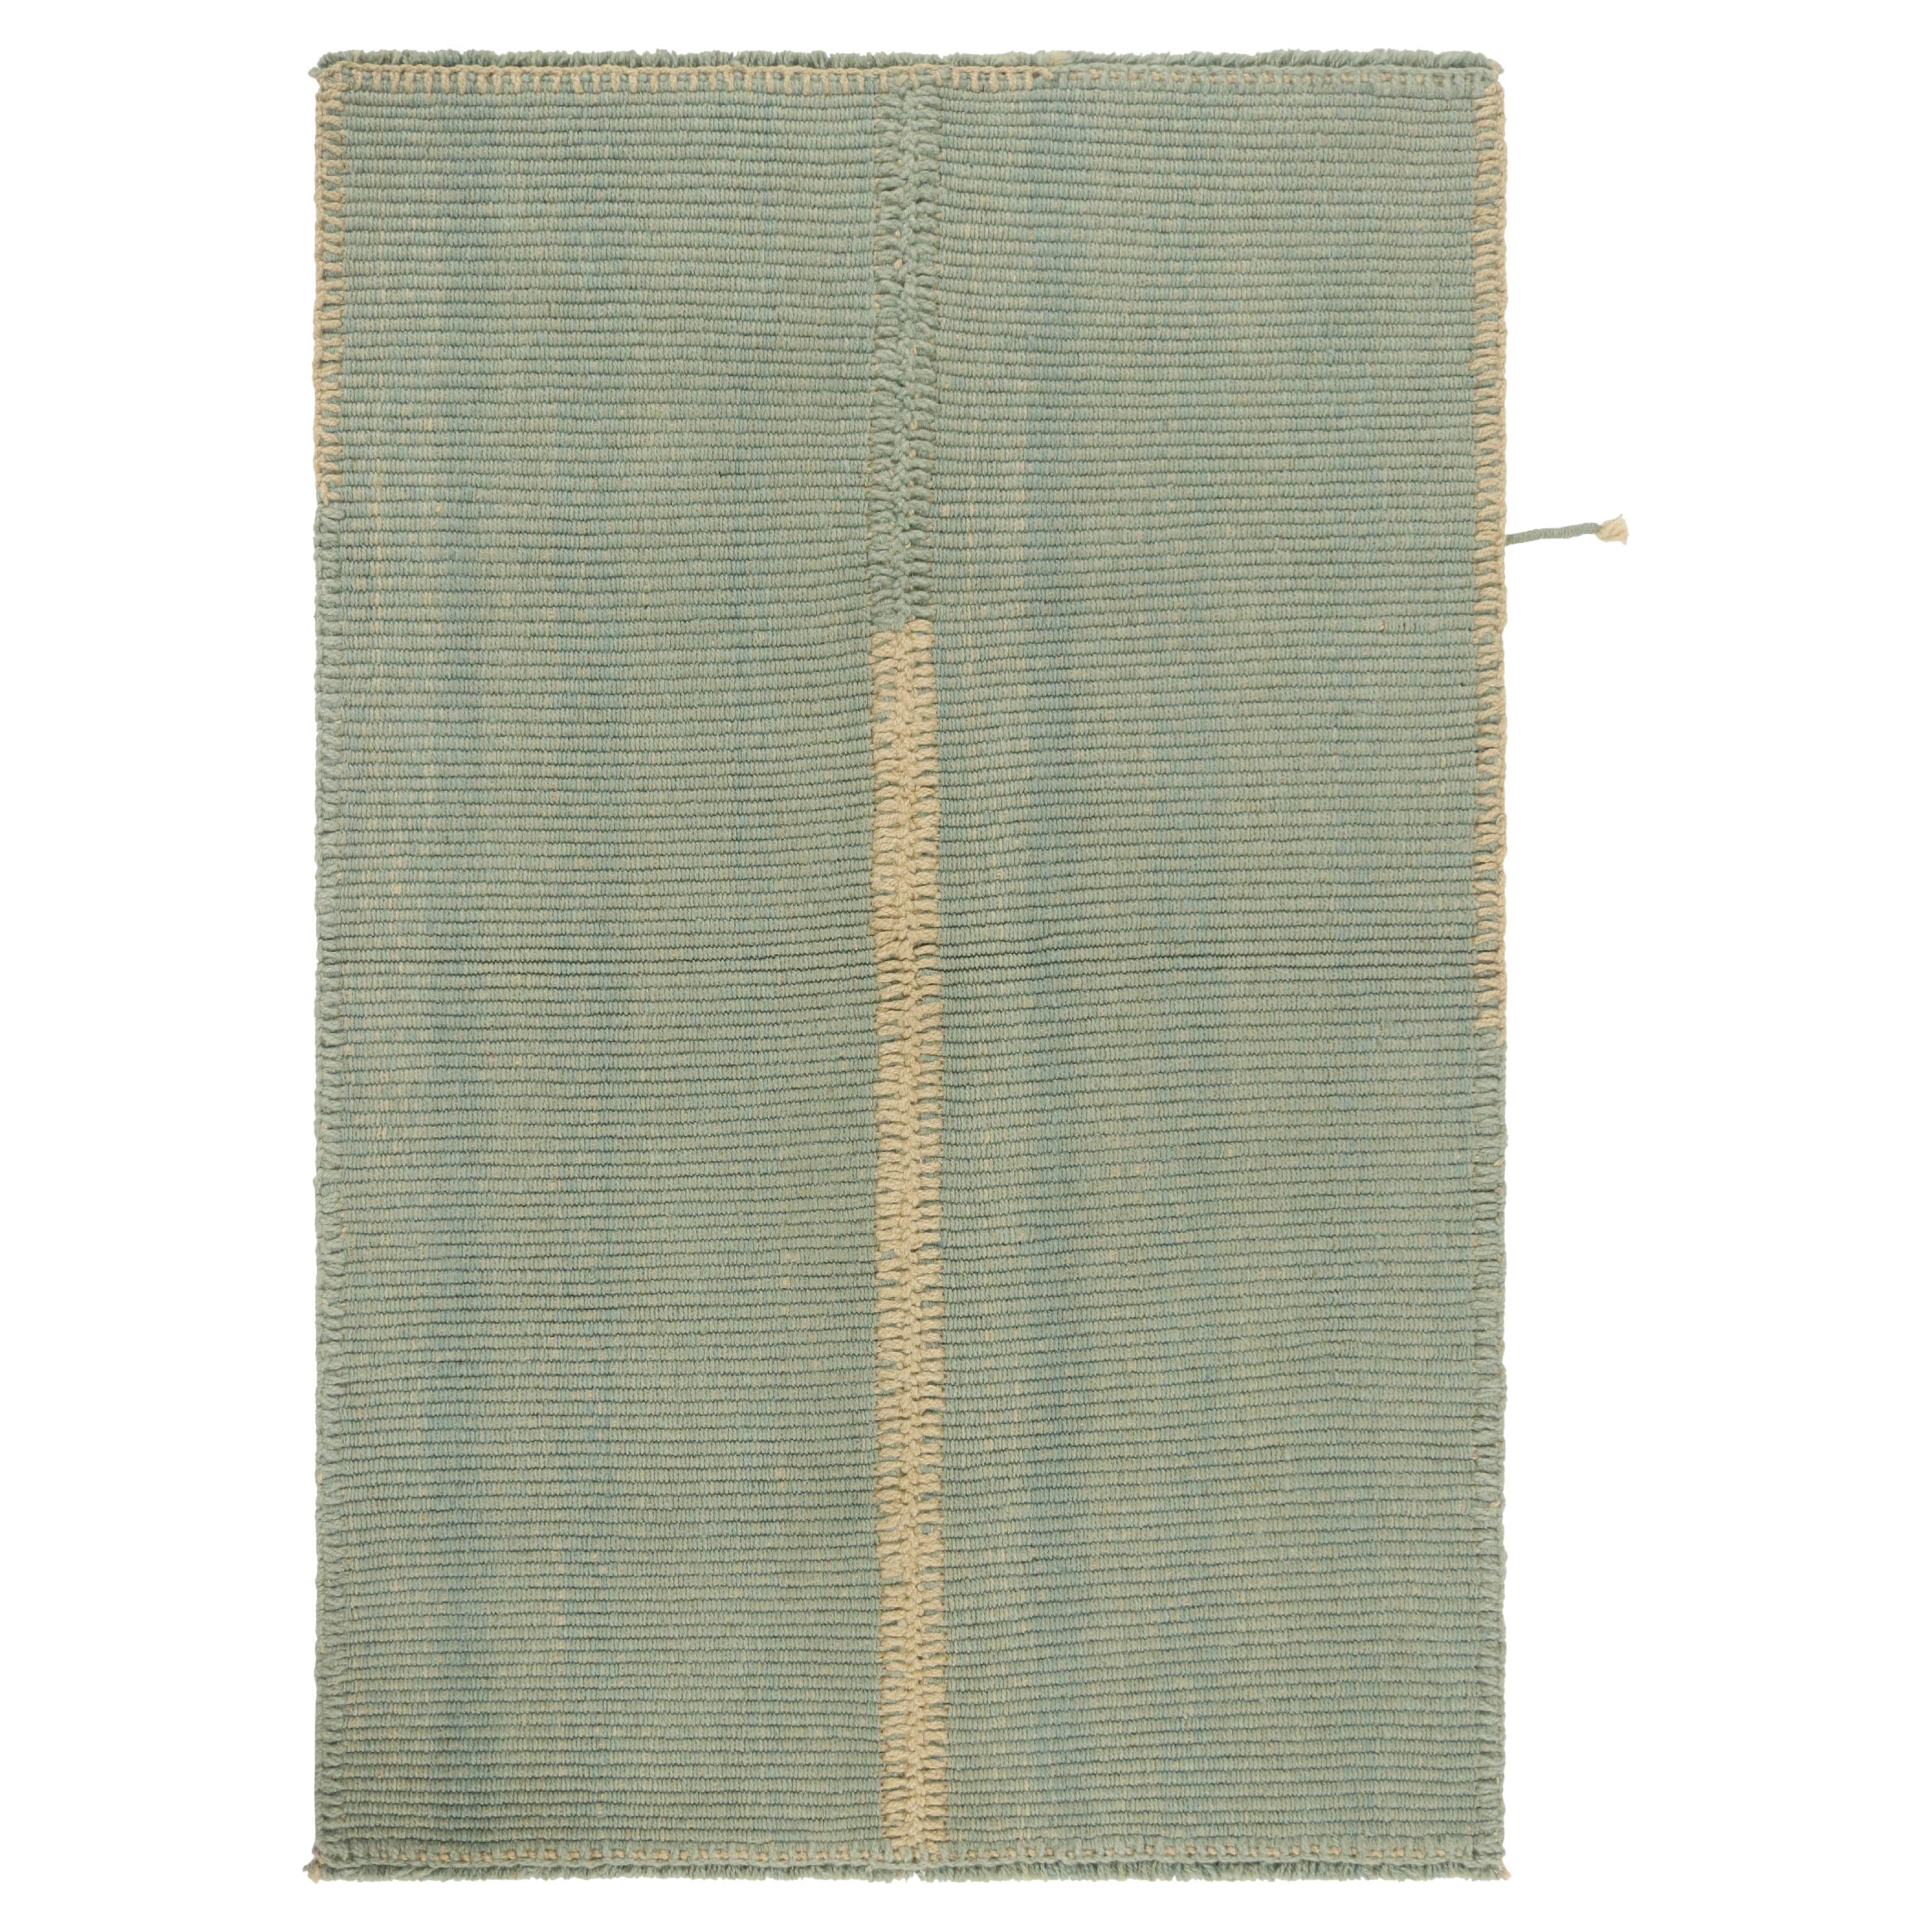 Rug & Kilim’s Contemporary Kilim in Light Blue with Off-White Accents For Sale